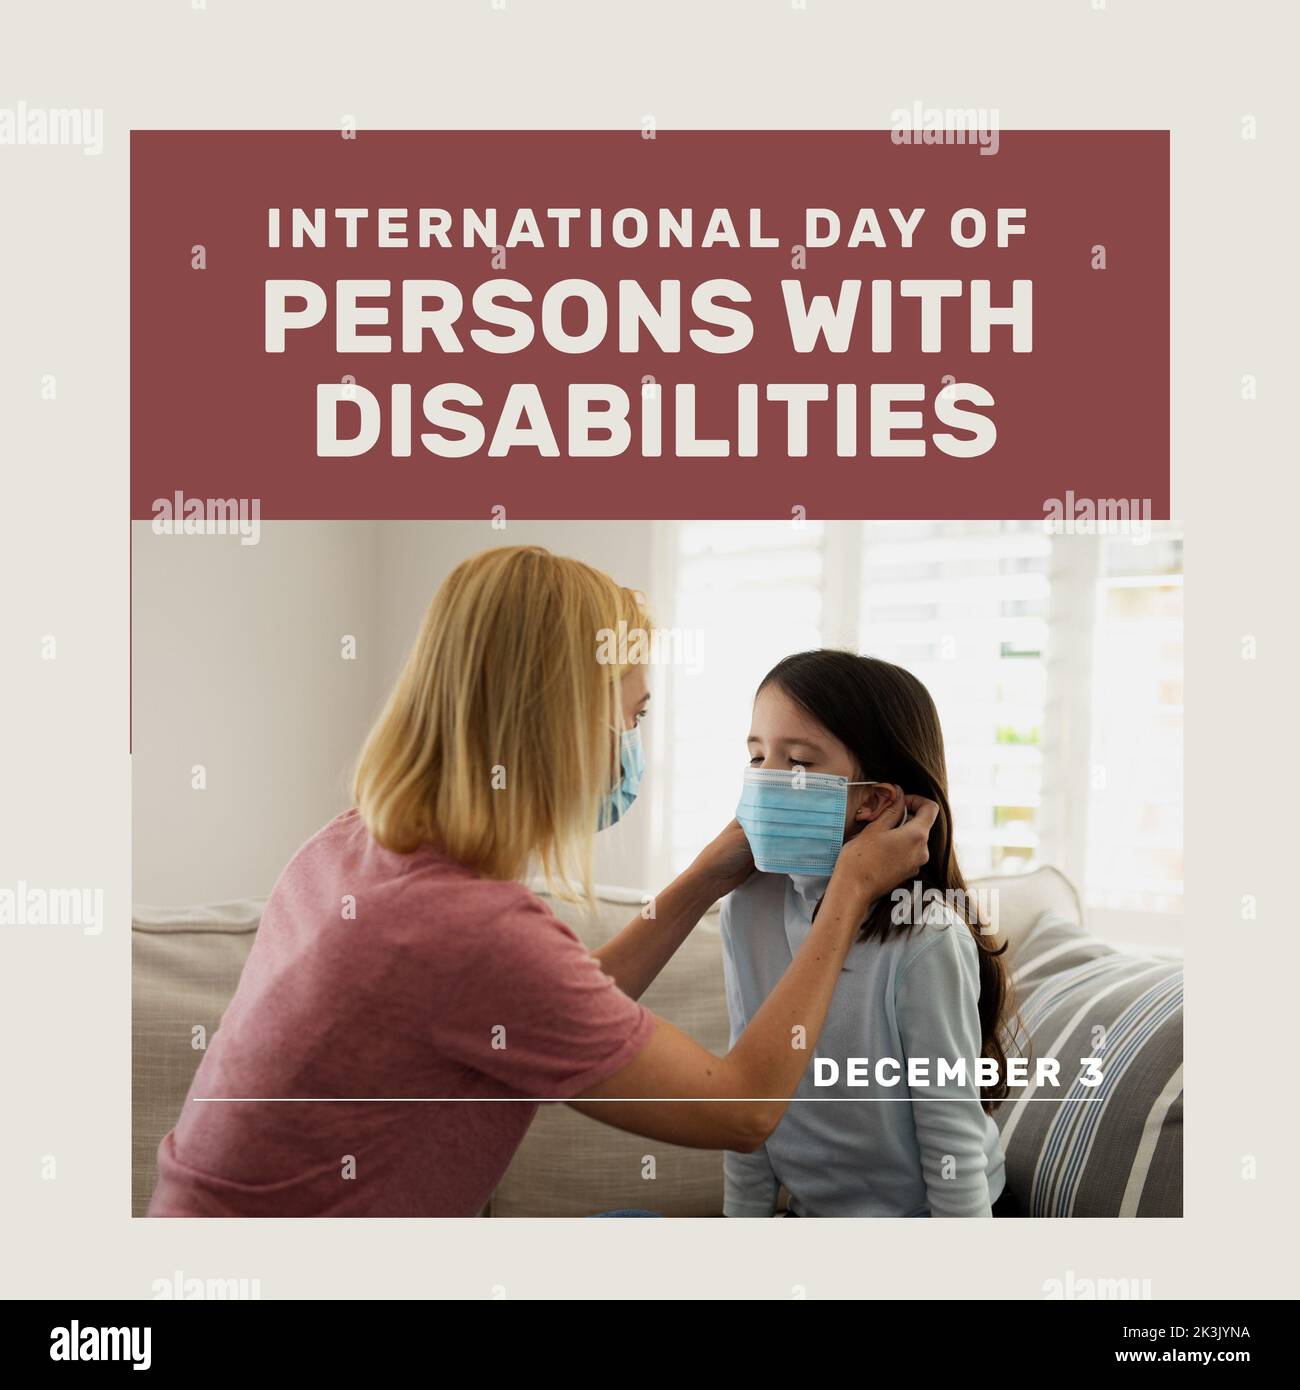 Composition of international day of persons with disabilities text over mother and daughter Stock Photo